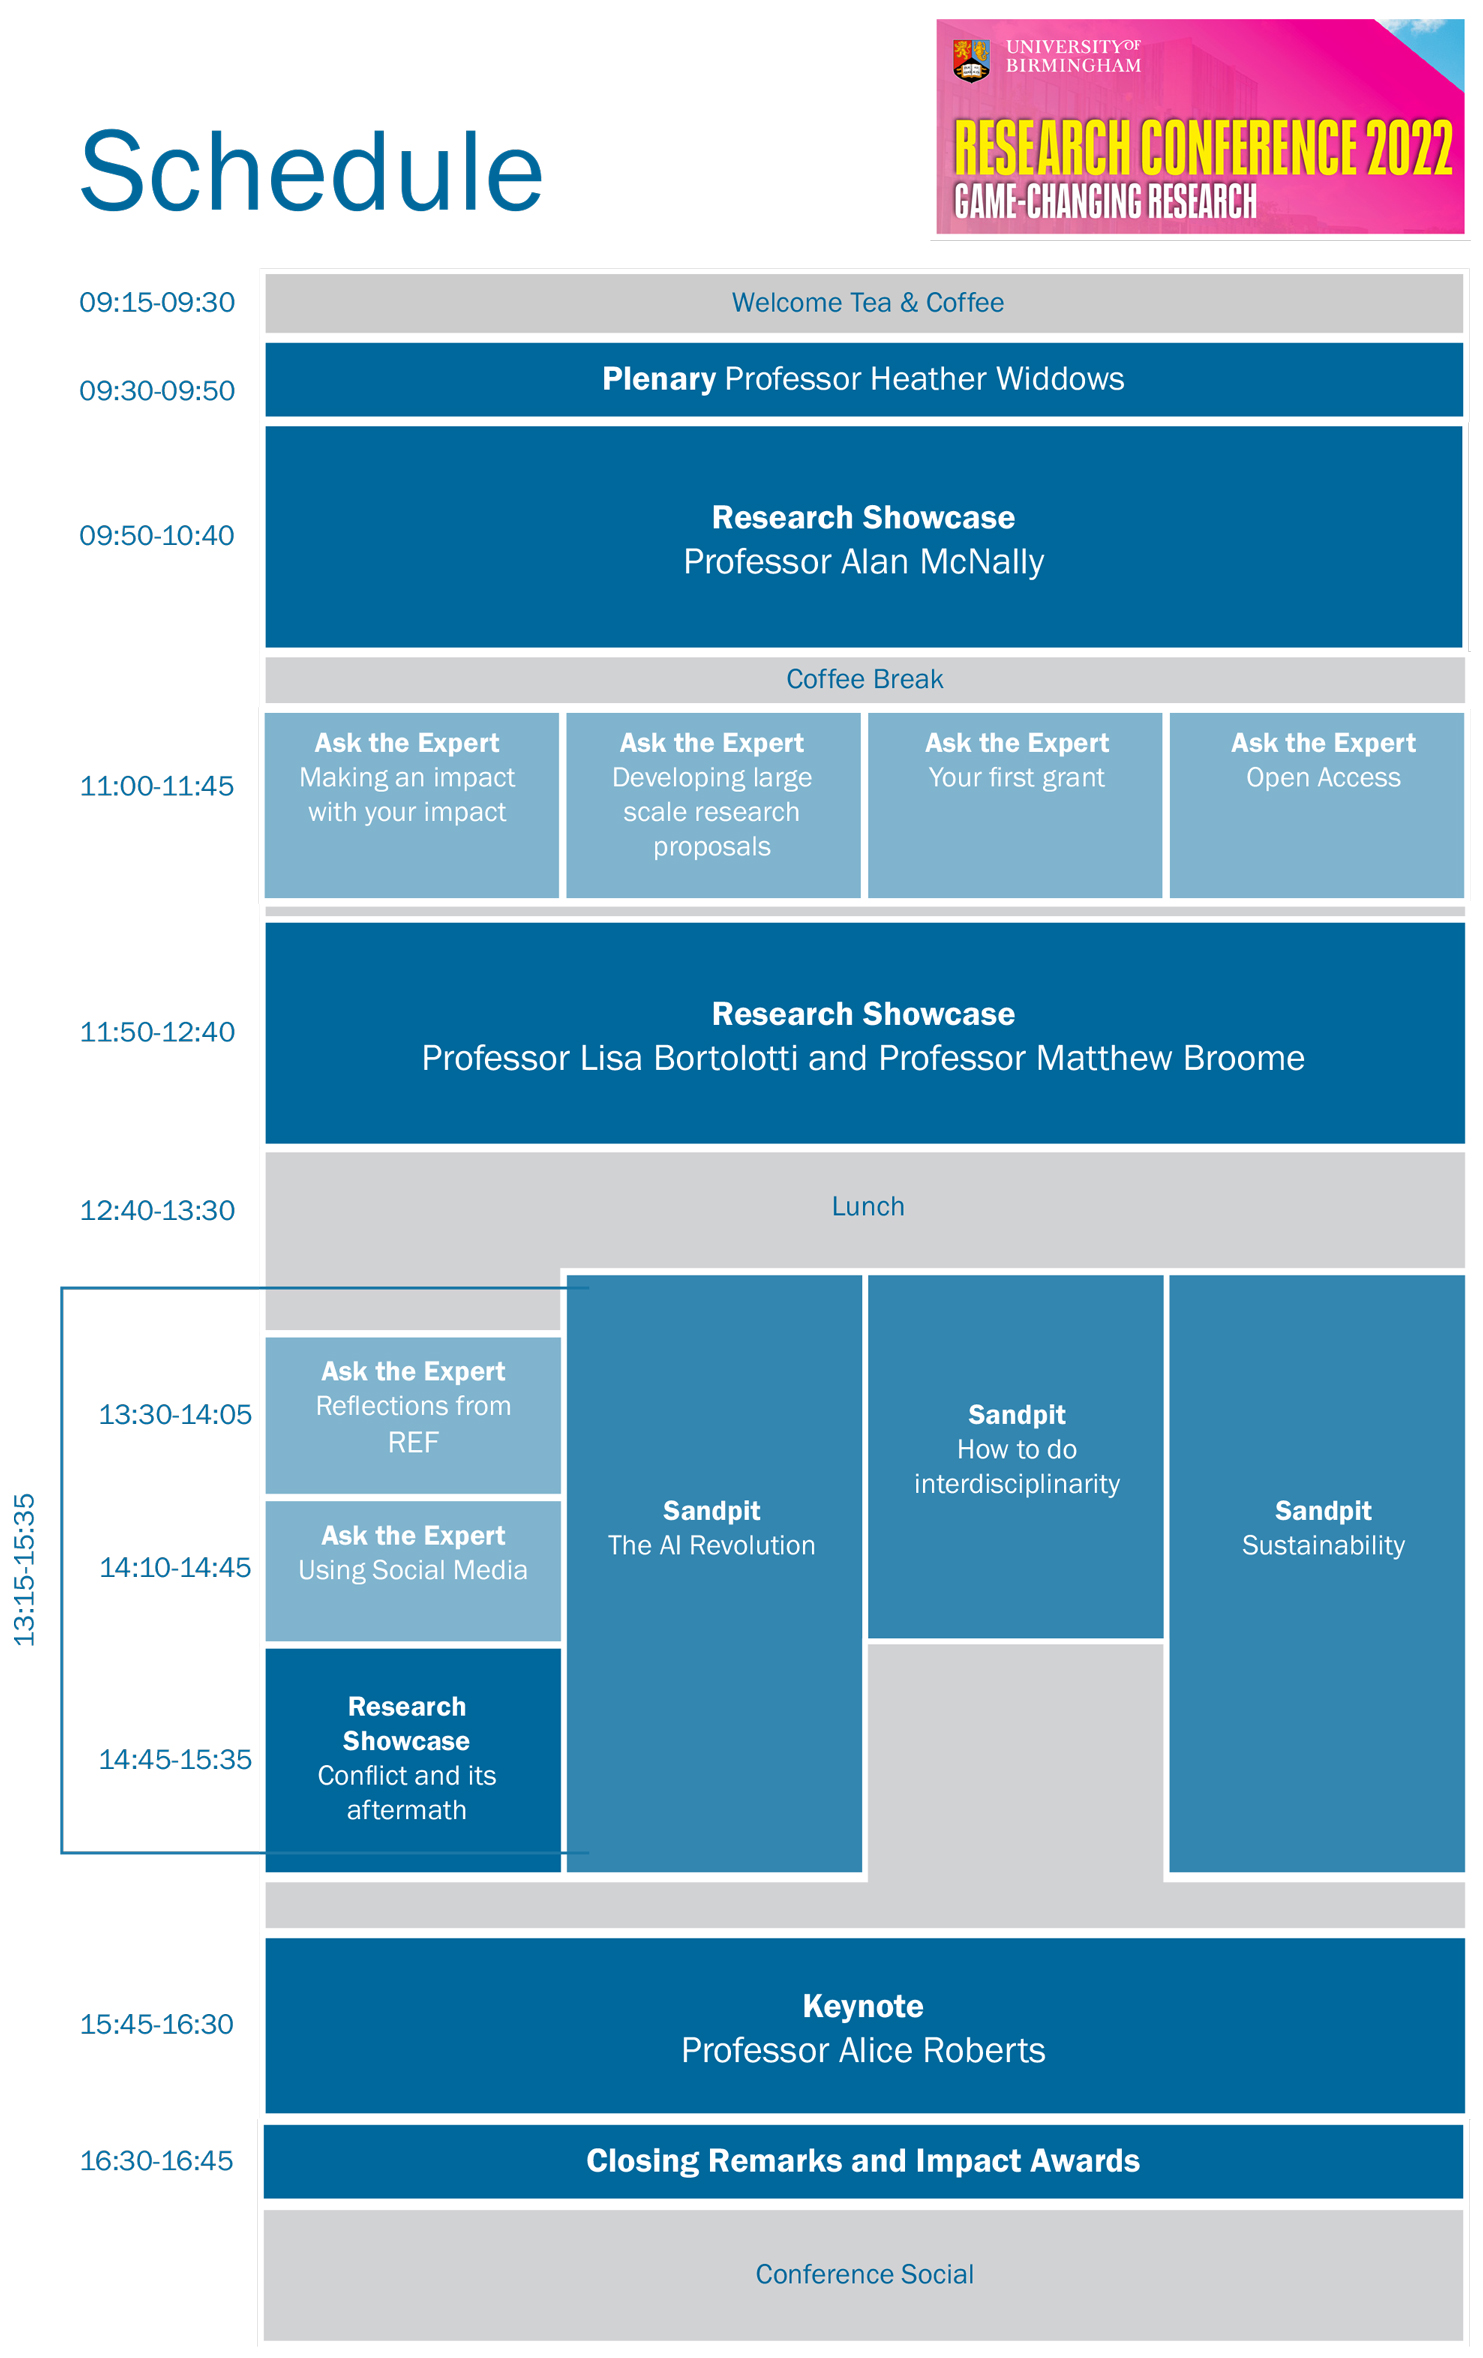 Schedule of the day: the conference starts at 9:15 with a plenary discussion by Heather WIddows. There will then be a research showcase and ask the expert sessions. A lunch break will be taken at 12:40 to 13:30. In the afternoon, a range of sandpit sessions will take place where attendees can sign on to one that is of particular interest to them. A keynote will be held by Professor Alice Roberts at 15:45-16:30, before closing remarks and the Impact Awards ceremony conclude the day at 16:30-16:45.